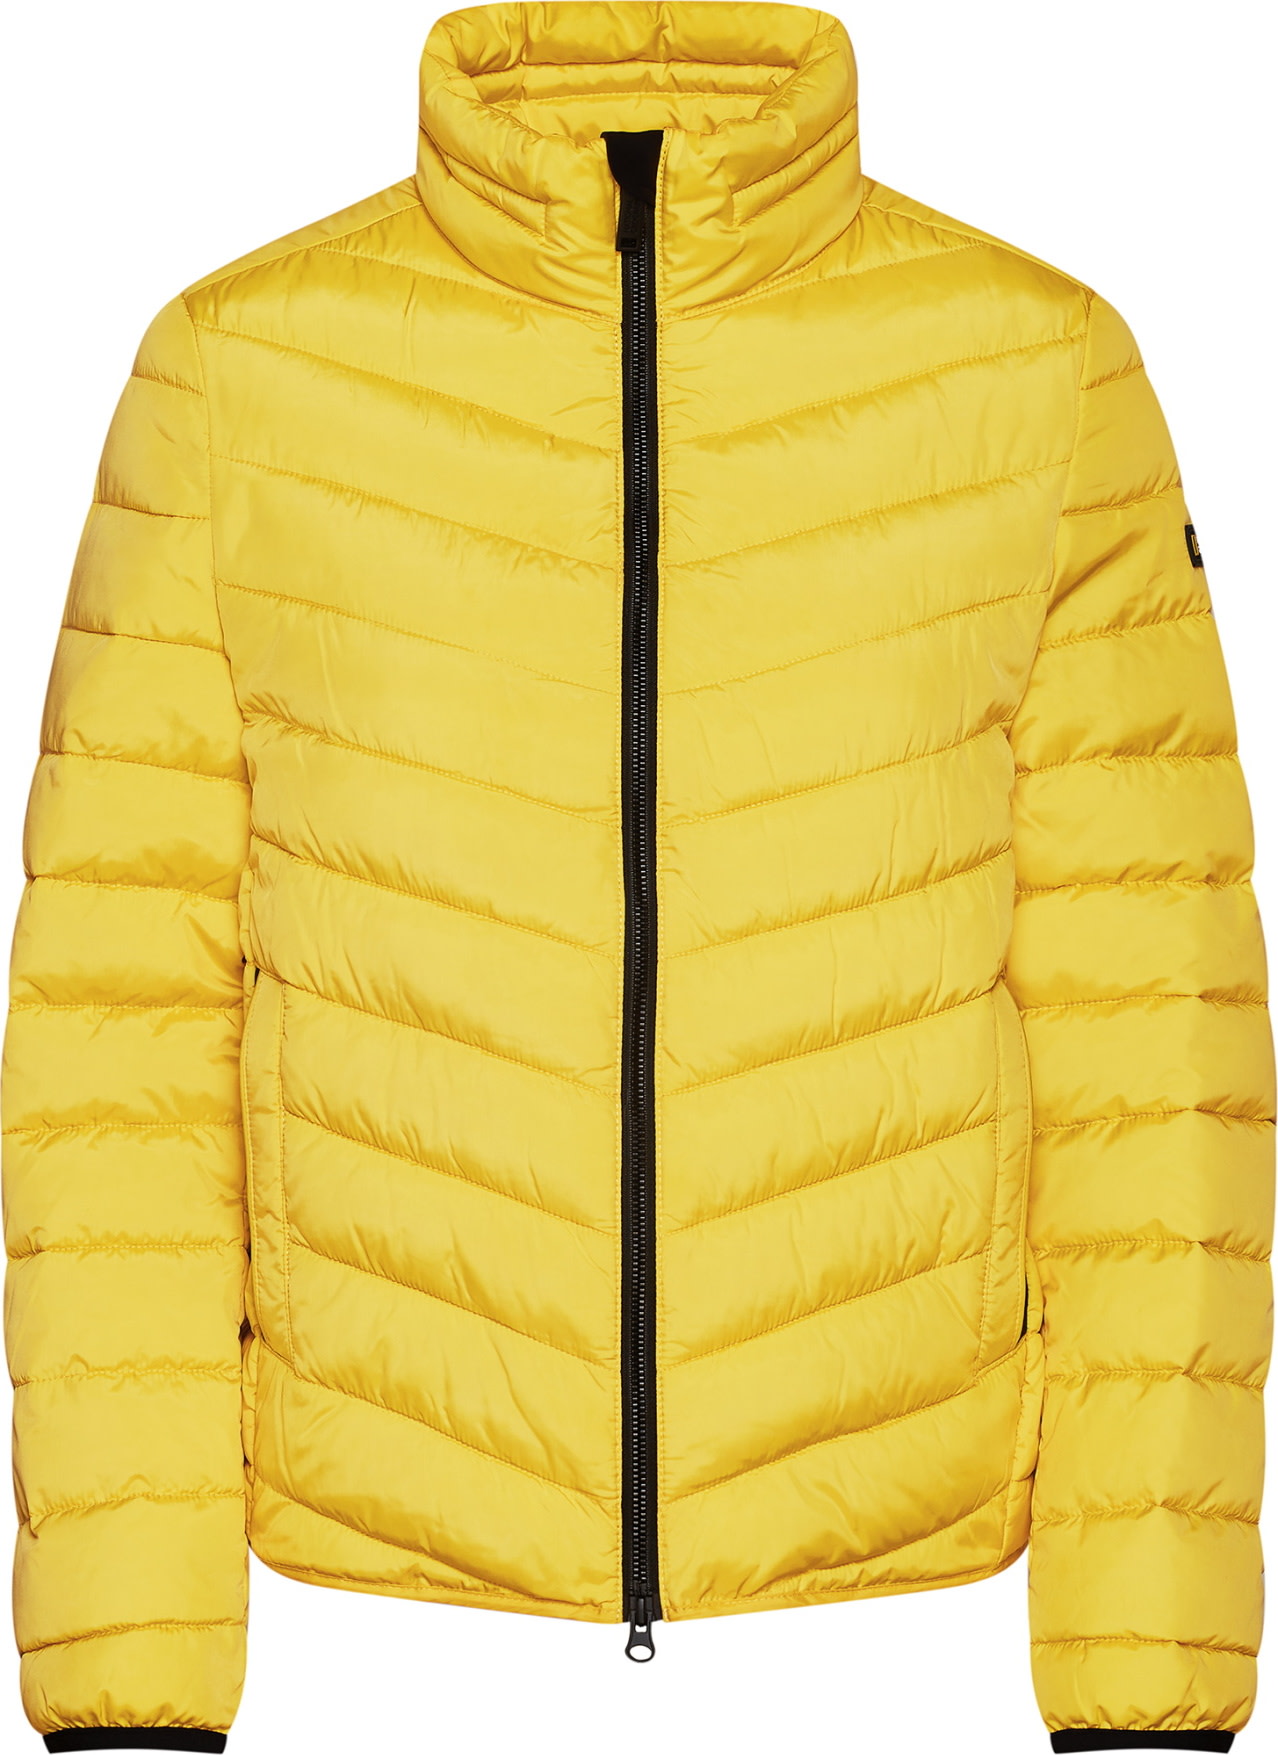 National Geographic Women’s Puffer Jacket lightgold